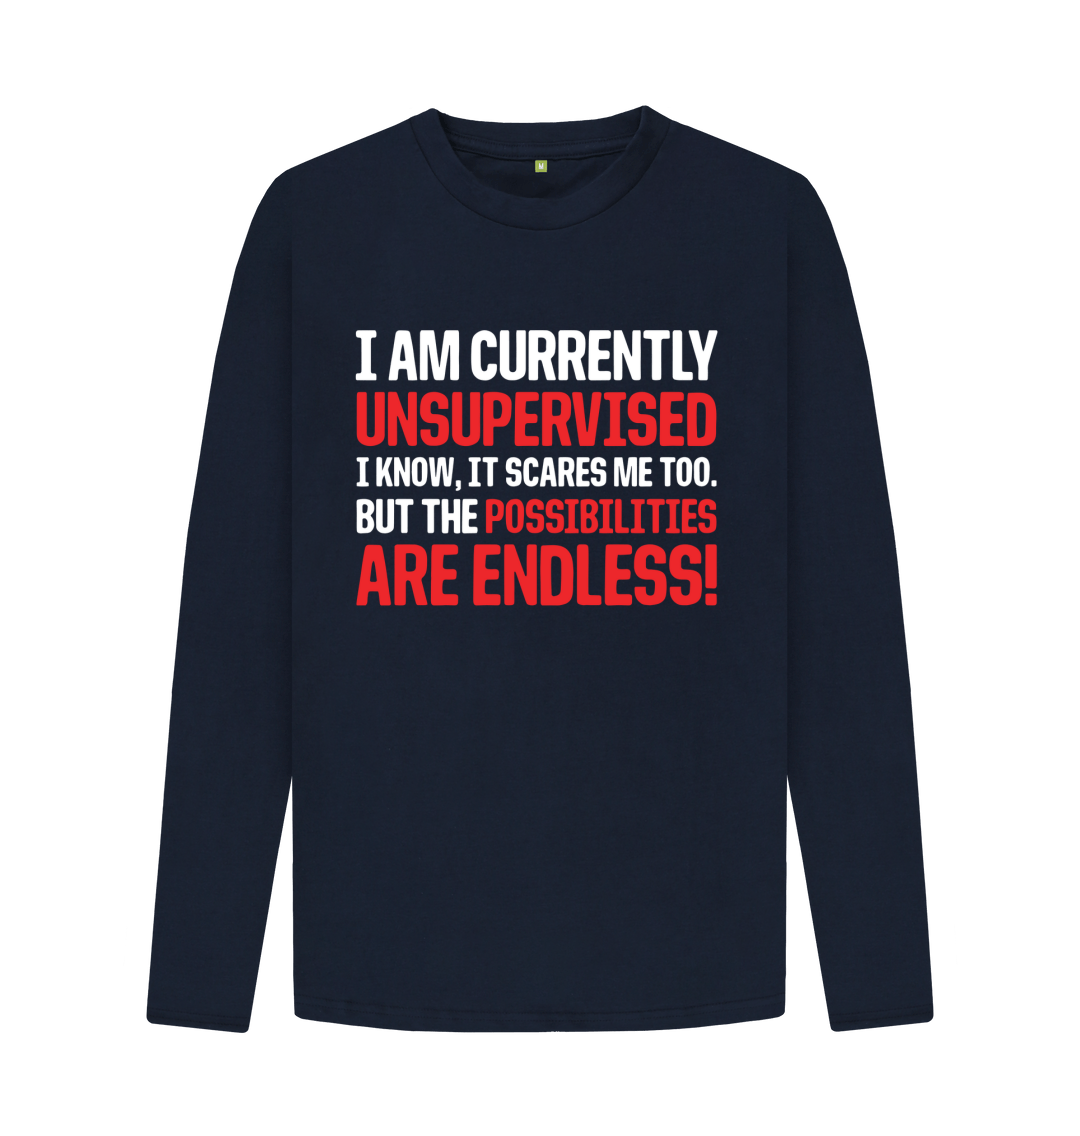 I'm Currently Unsupervised Endless Possibilities Long Sleeve